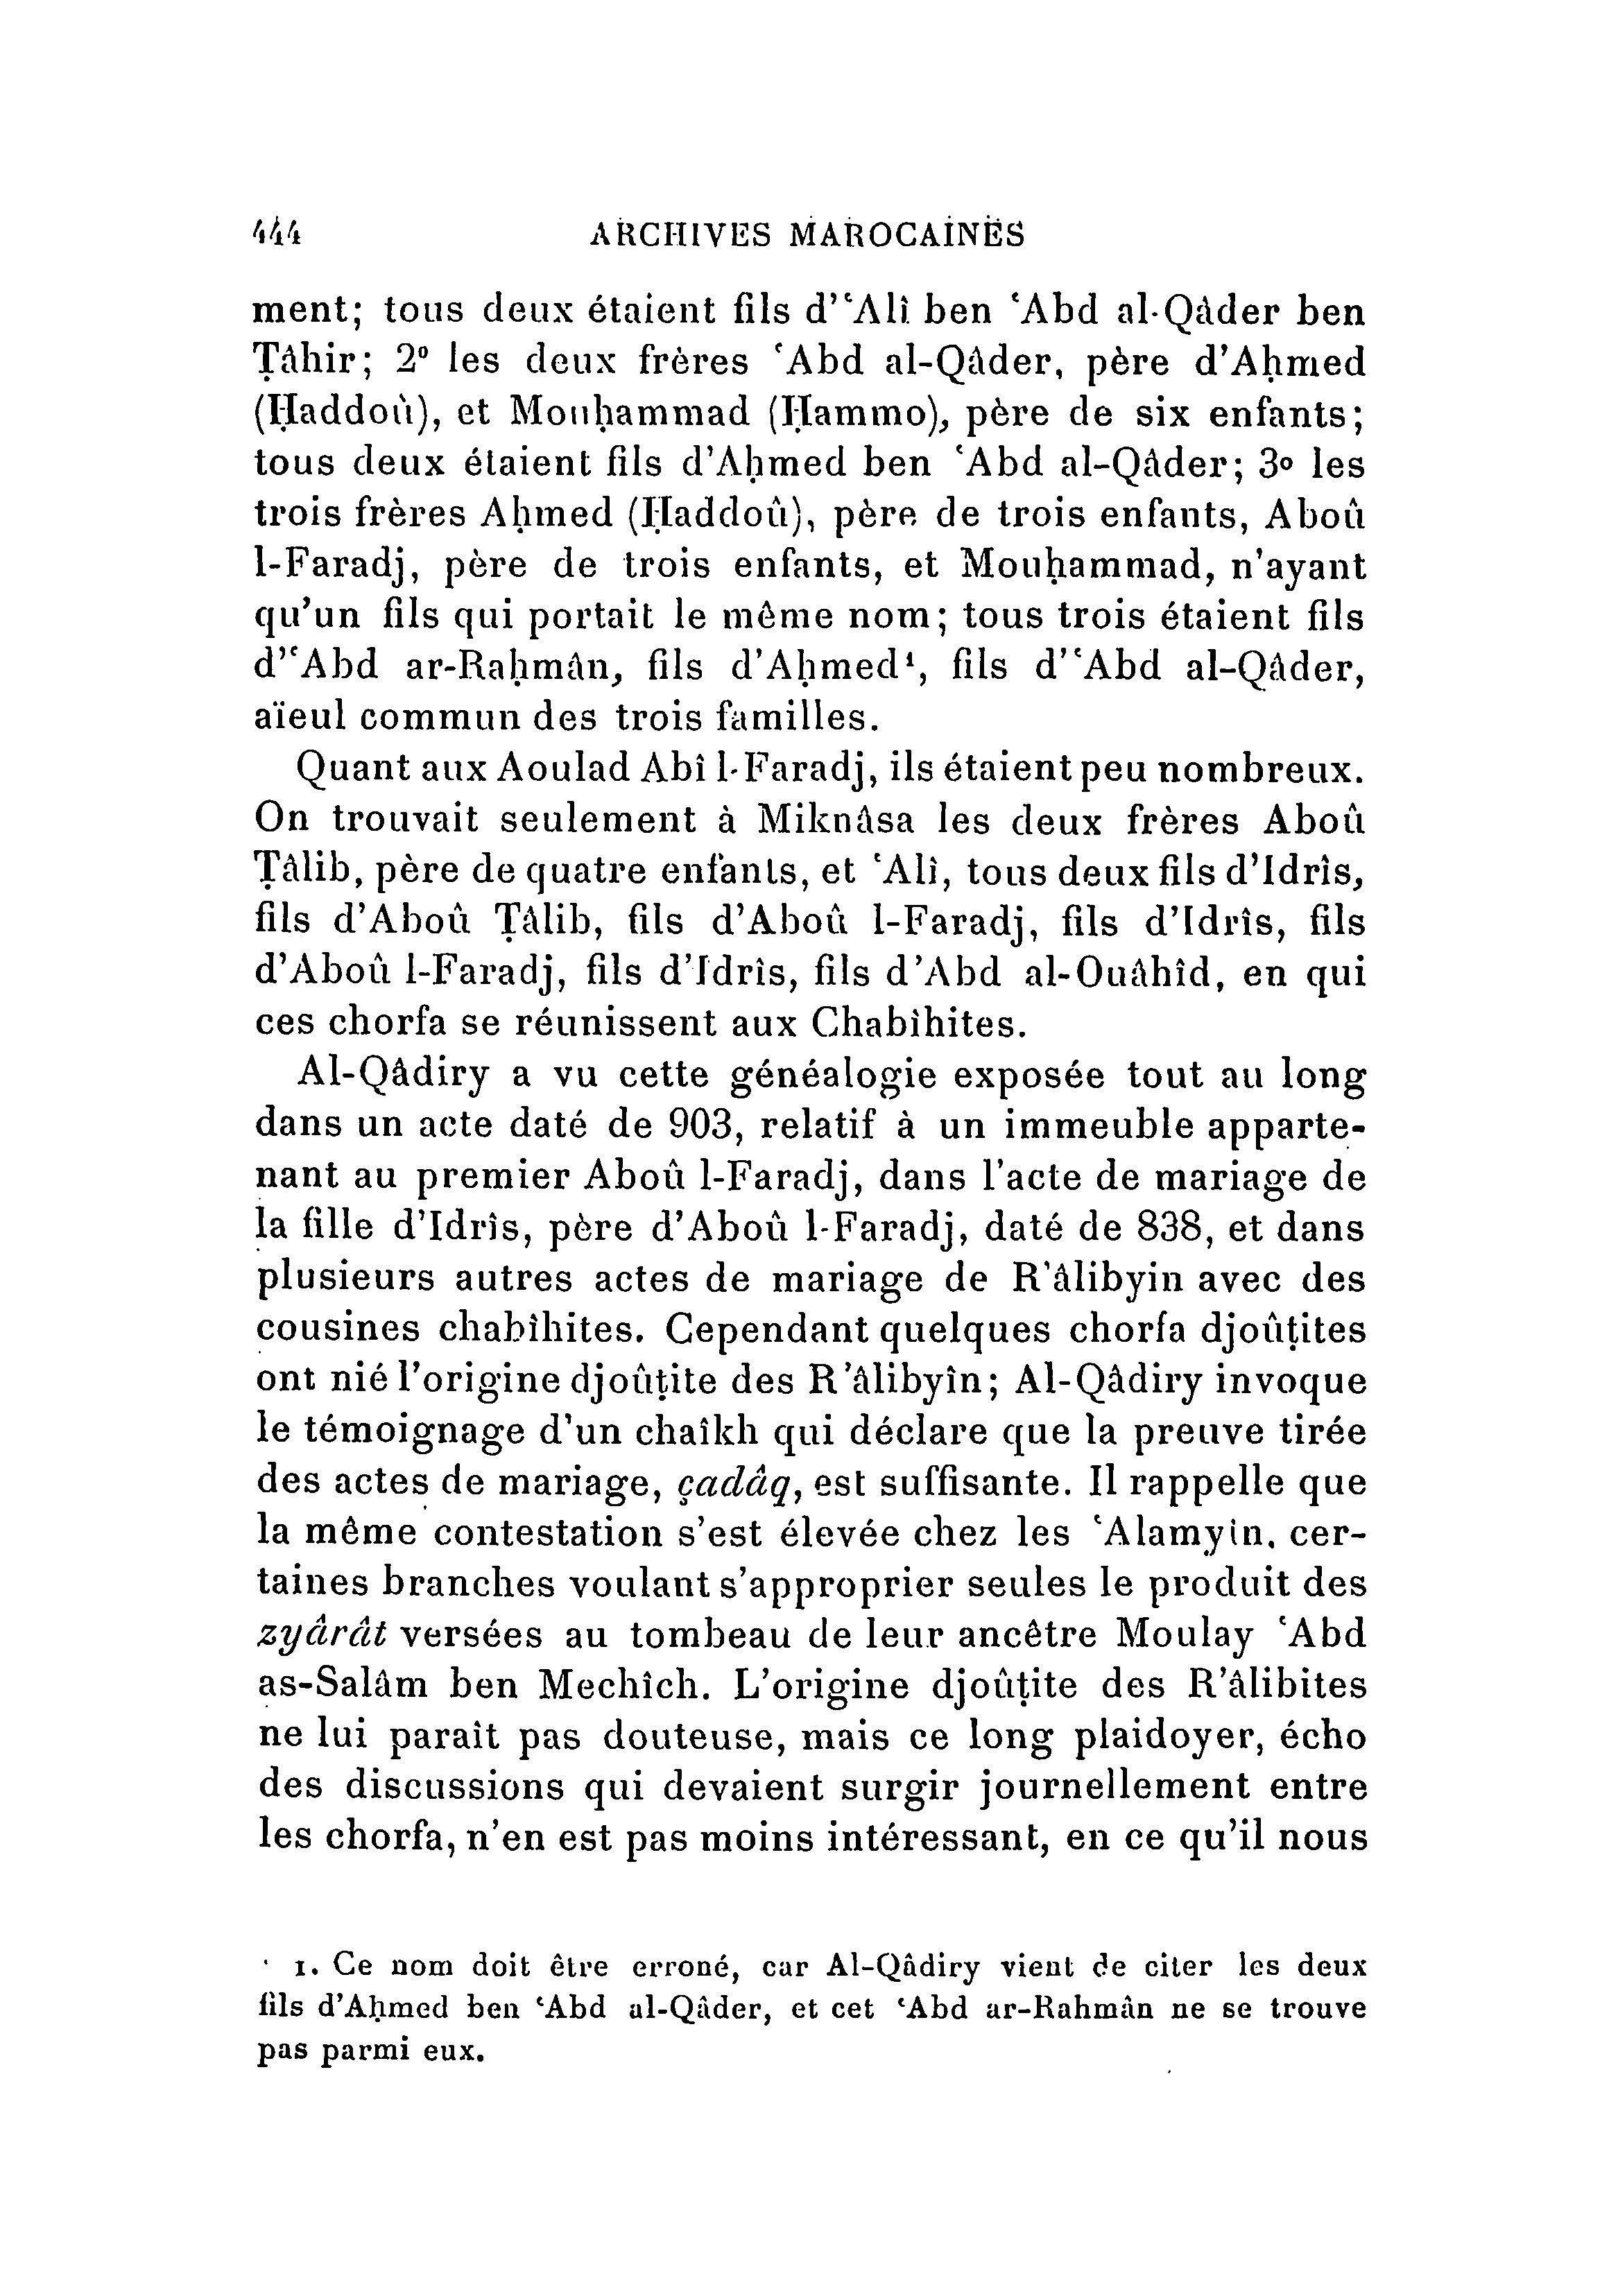 archives_marocaines-vol-1_page_456